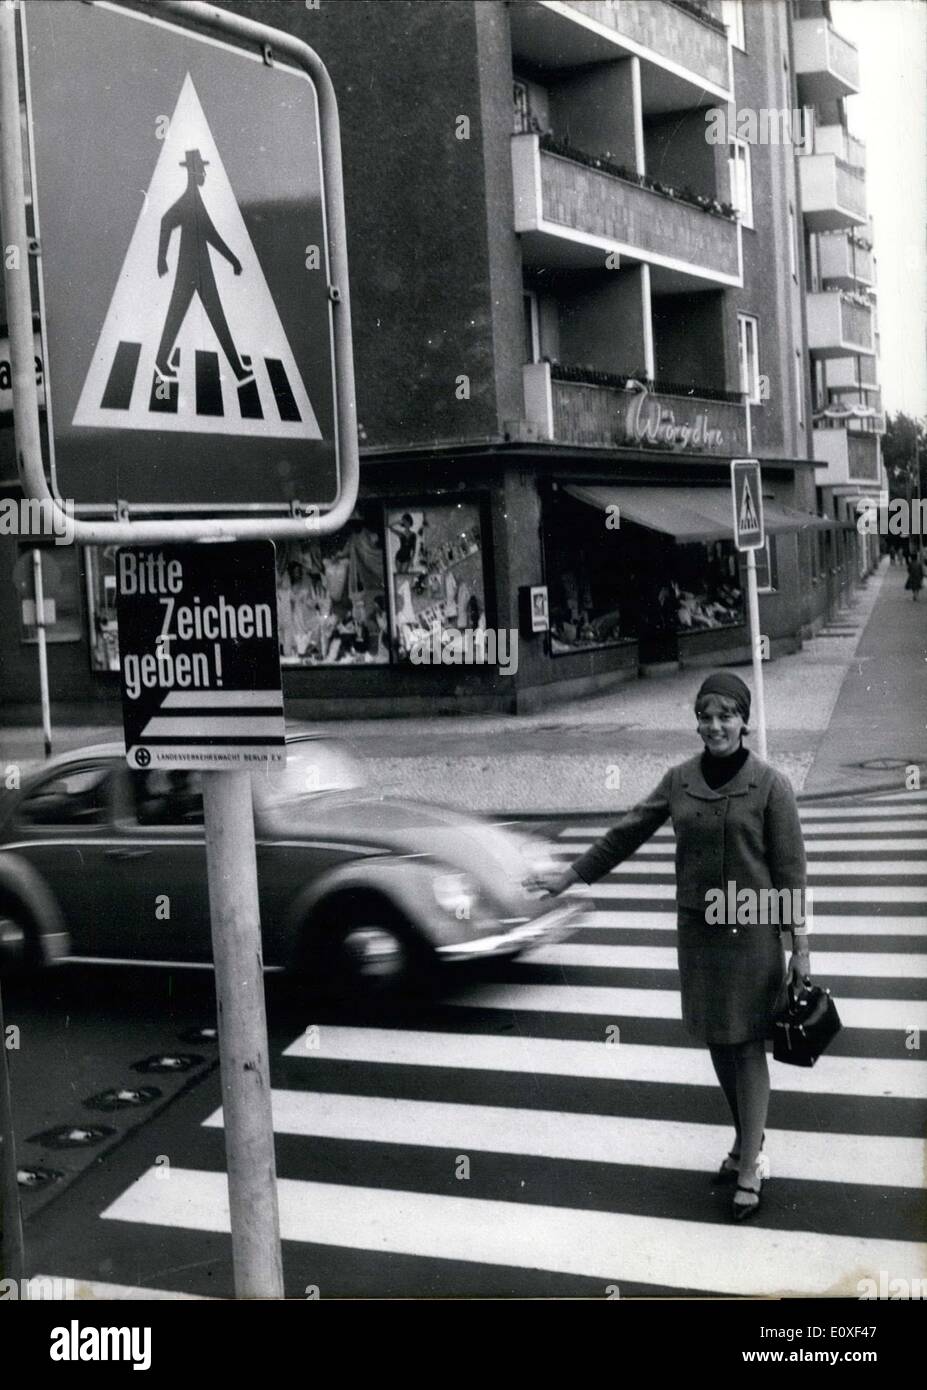 Jul. 23, 1966 - The zebra stripes always warn pedestrians of the dangers of walking on the street. In order to further warn pedestrians during chaotic rush hours, signs have been installed. The signs read ''Bitte Zeichen geben!'' or ''Please signal!'' Whether or not the signs work remained to be seen. Stock Photo